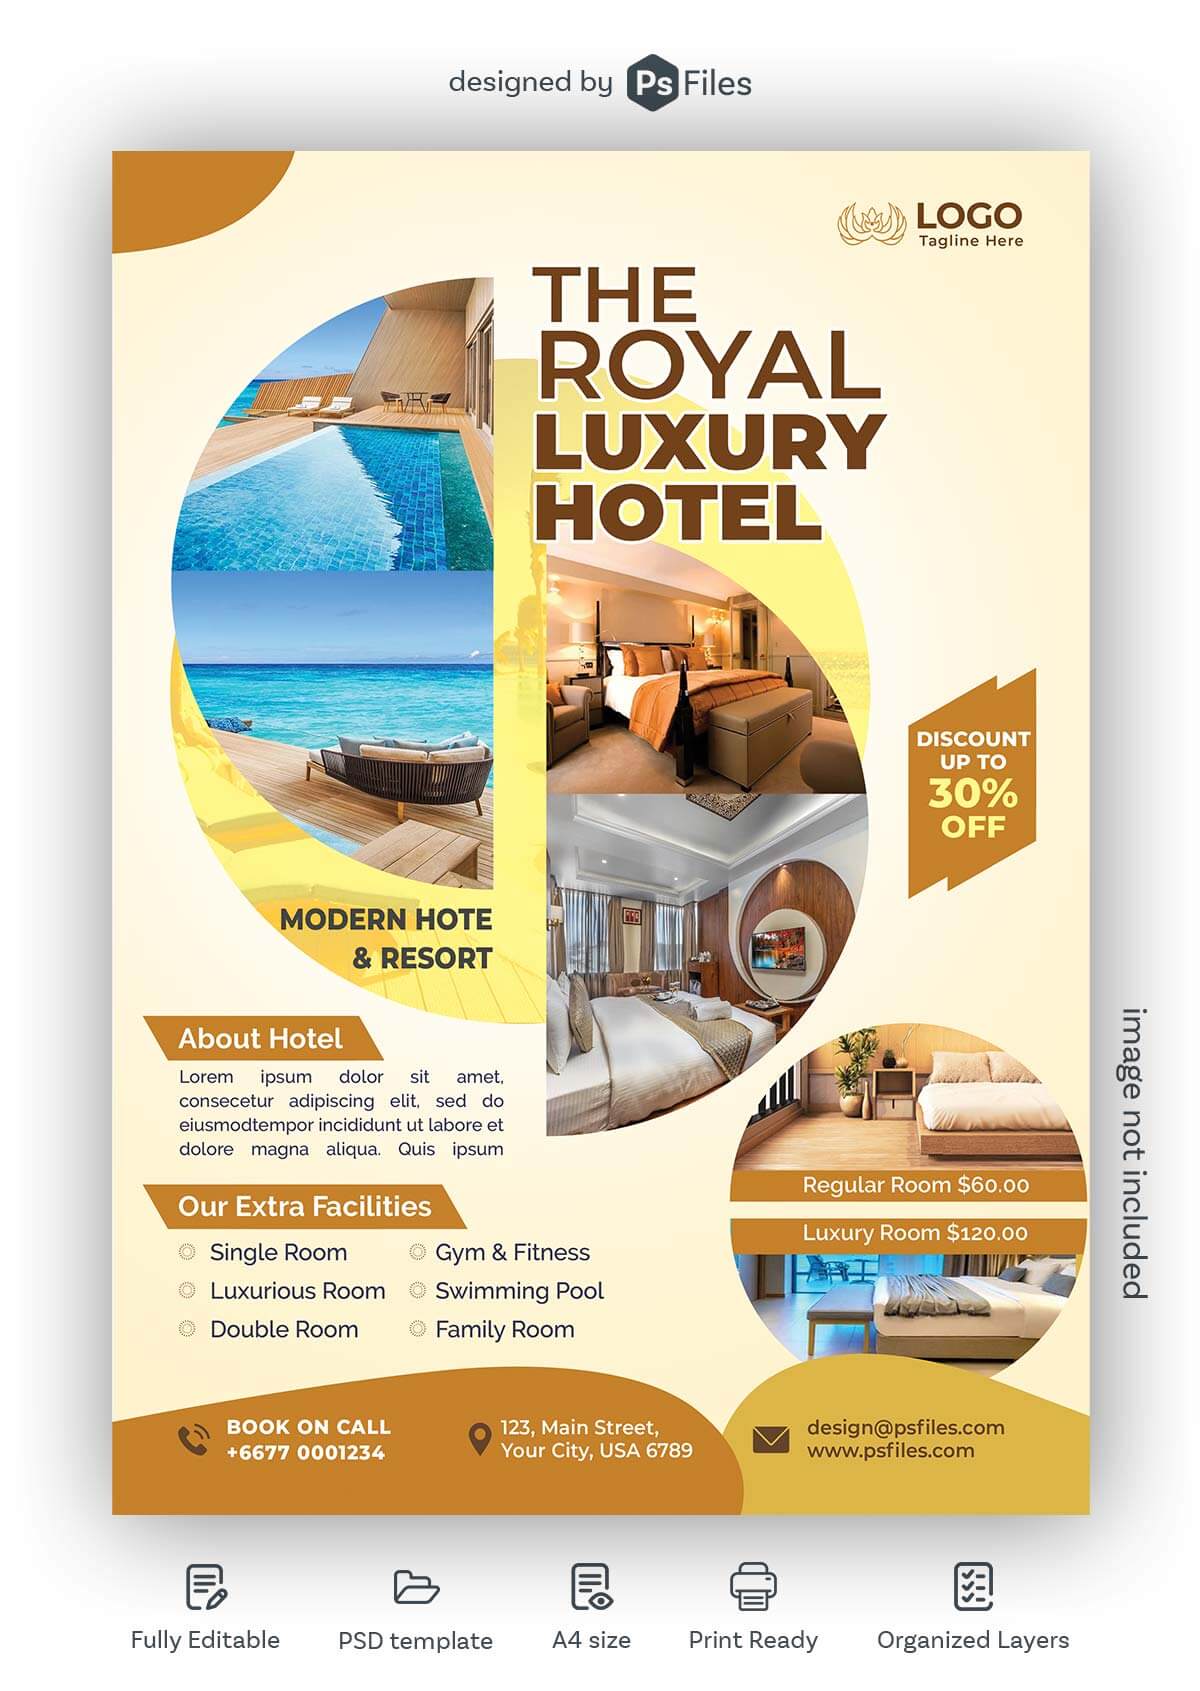 Luxury Hotel and Resorts Flyer Design Free PSD Template